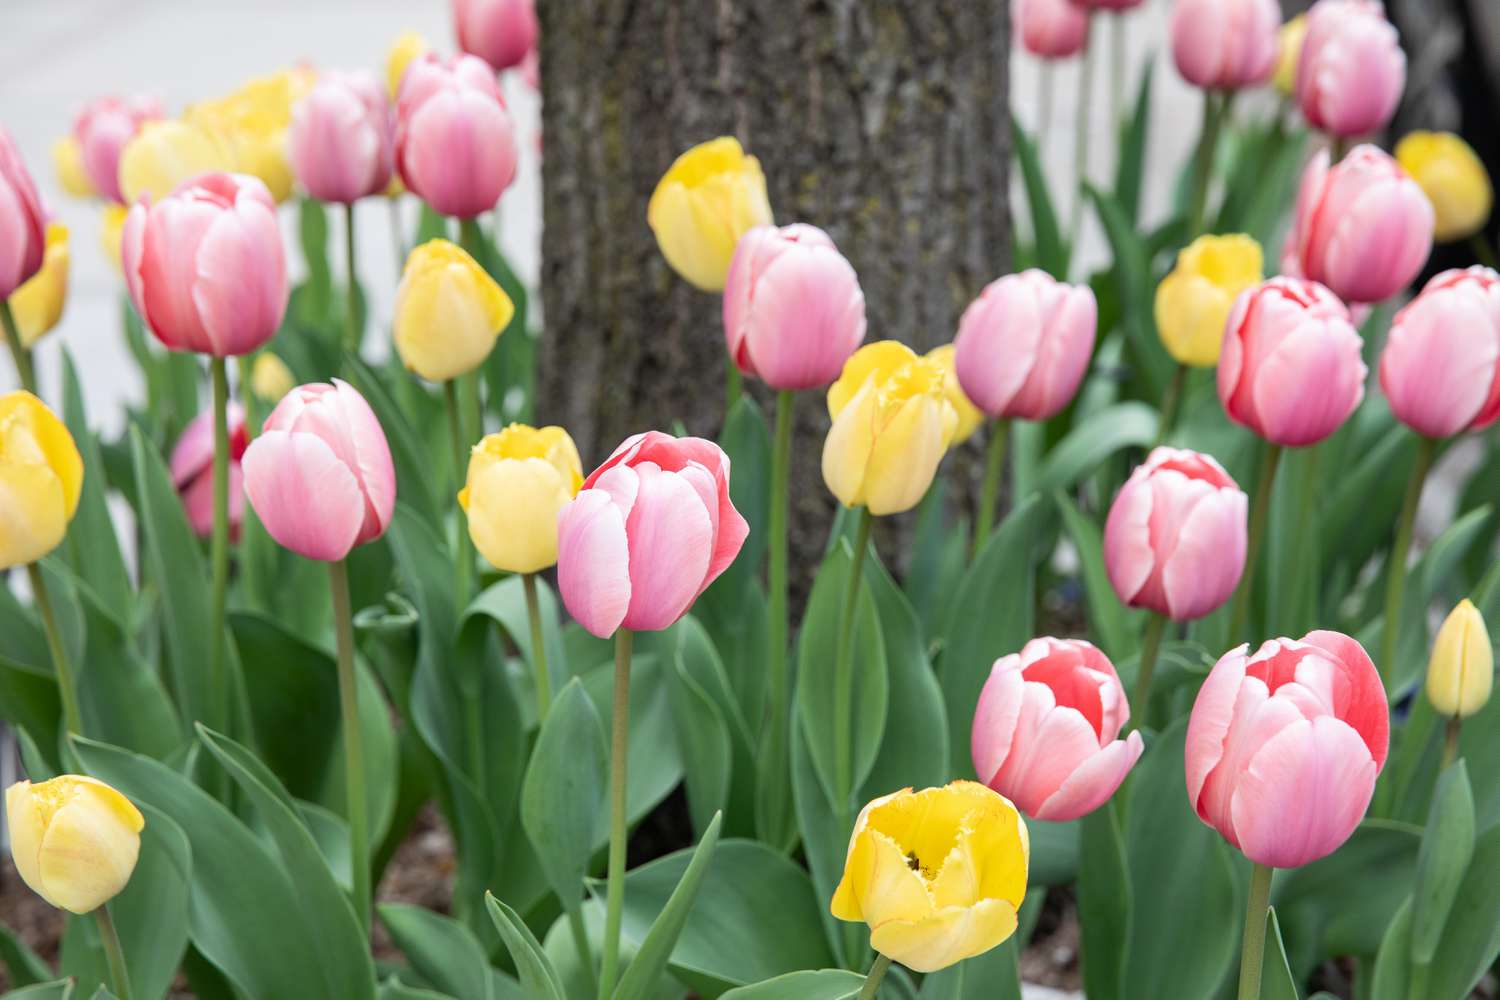 Pink and yellow tulips growing at base of tree trunk closeup